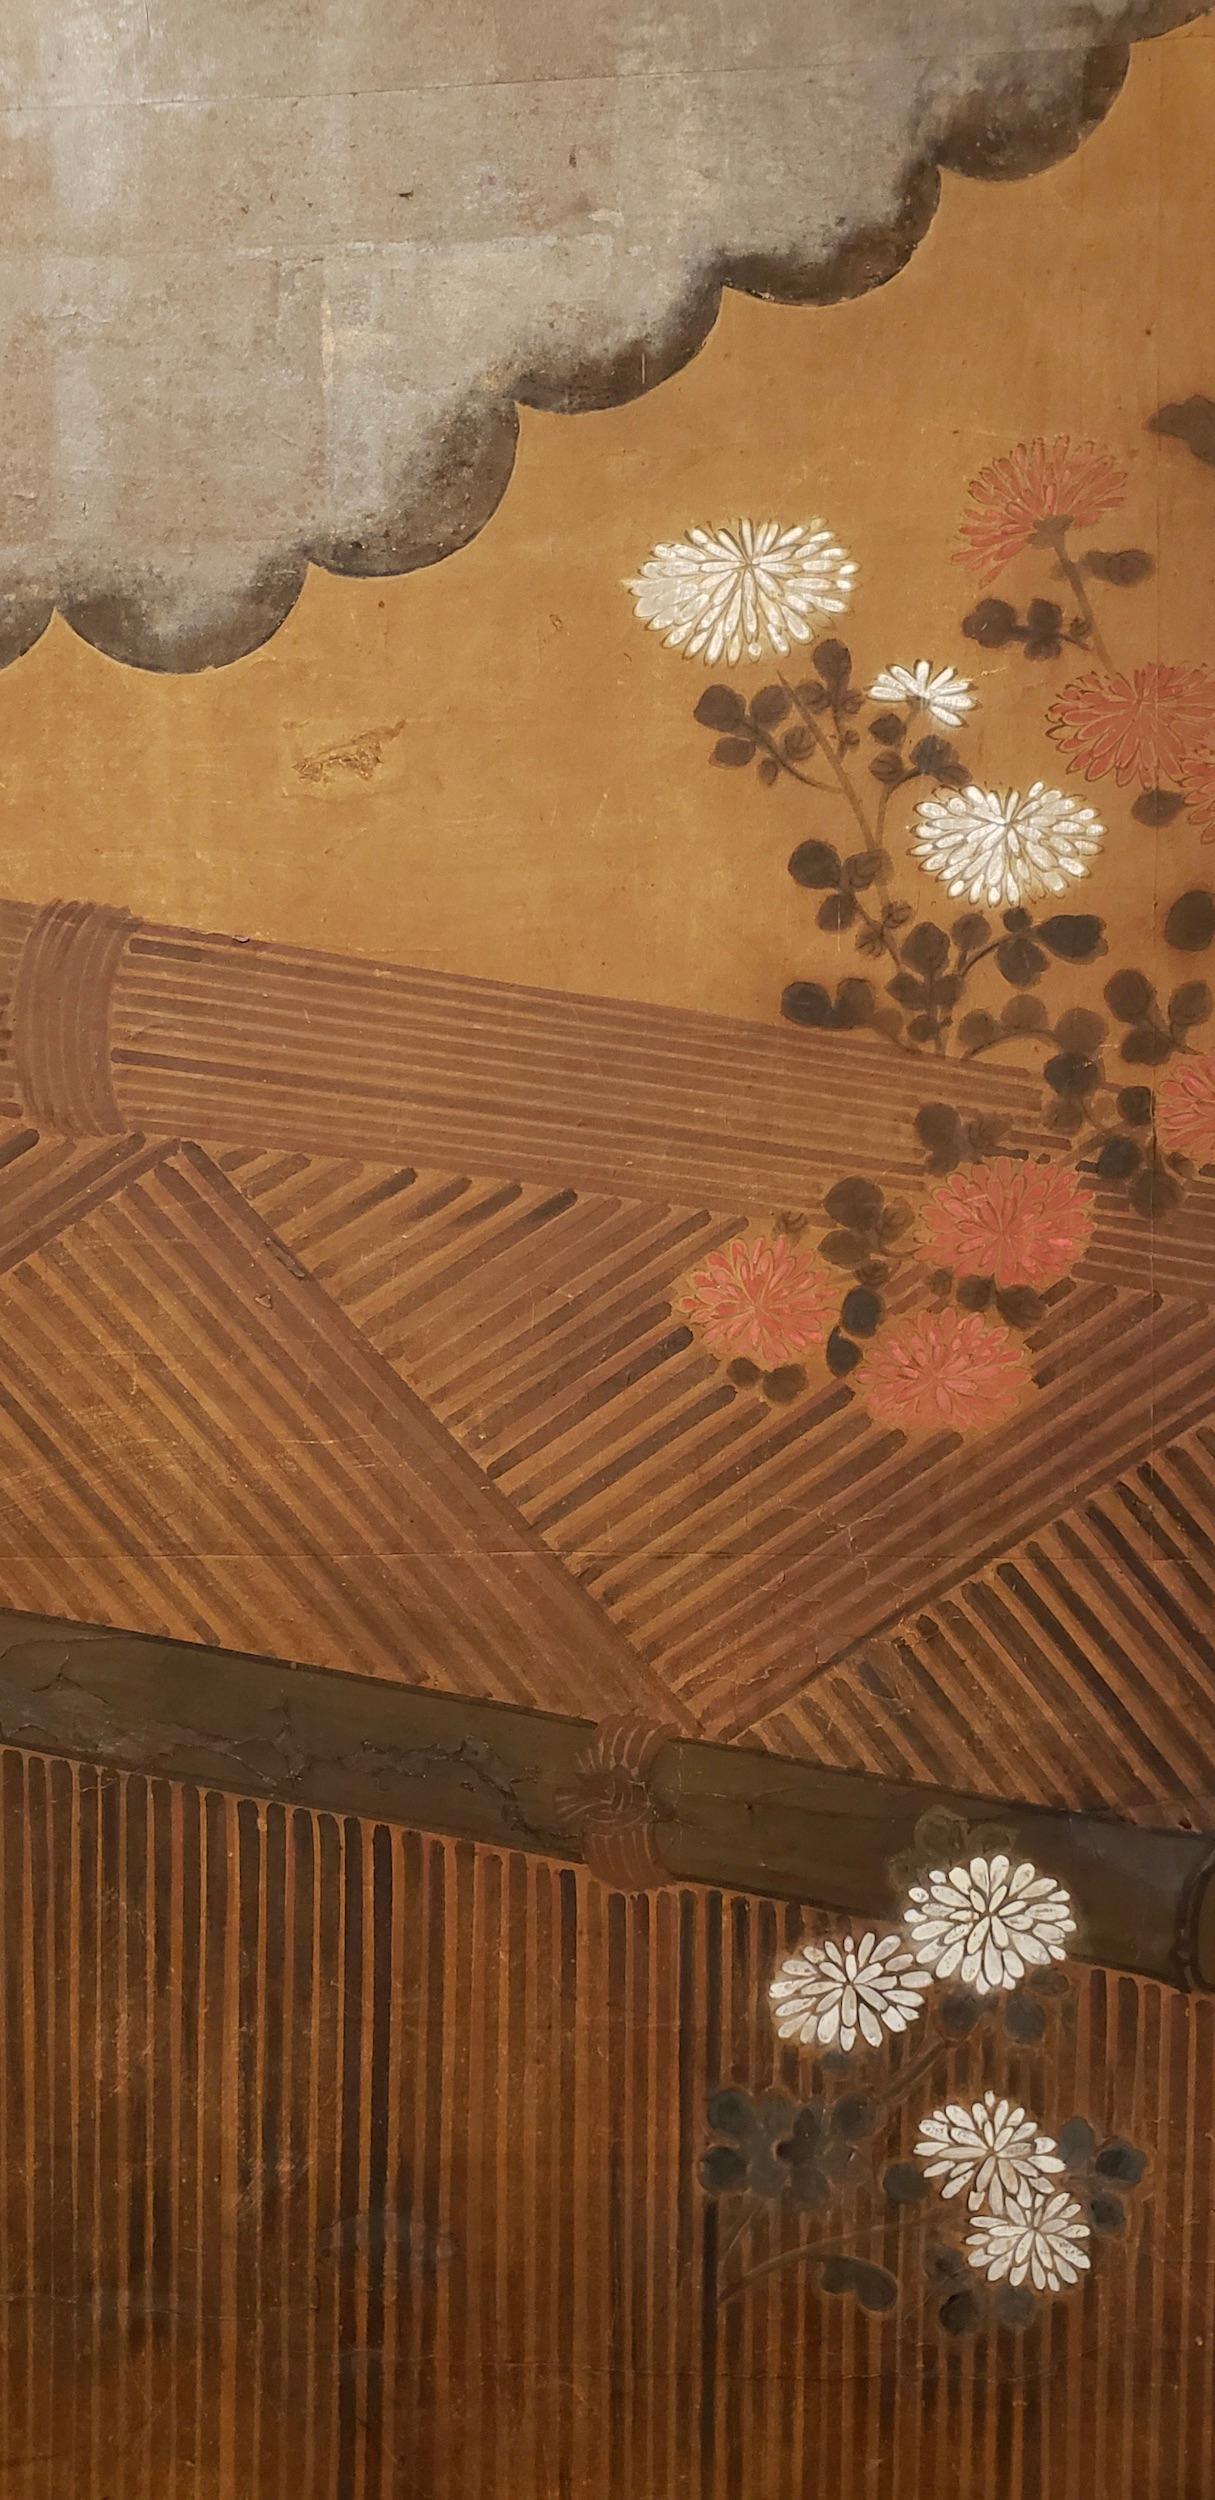 Edo Japanese Two-Panel Screen Chrysanthemums Over a Woven Reed Fence